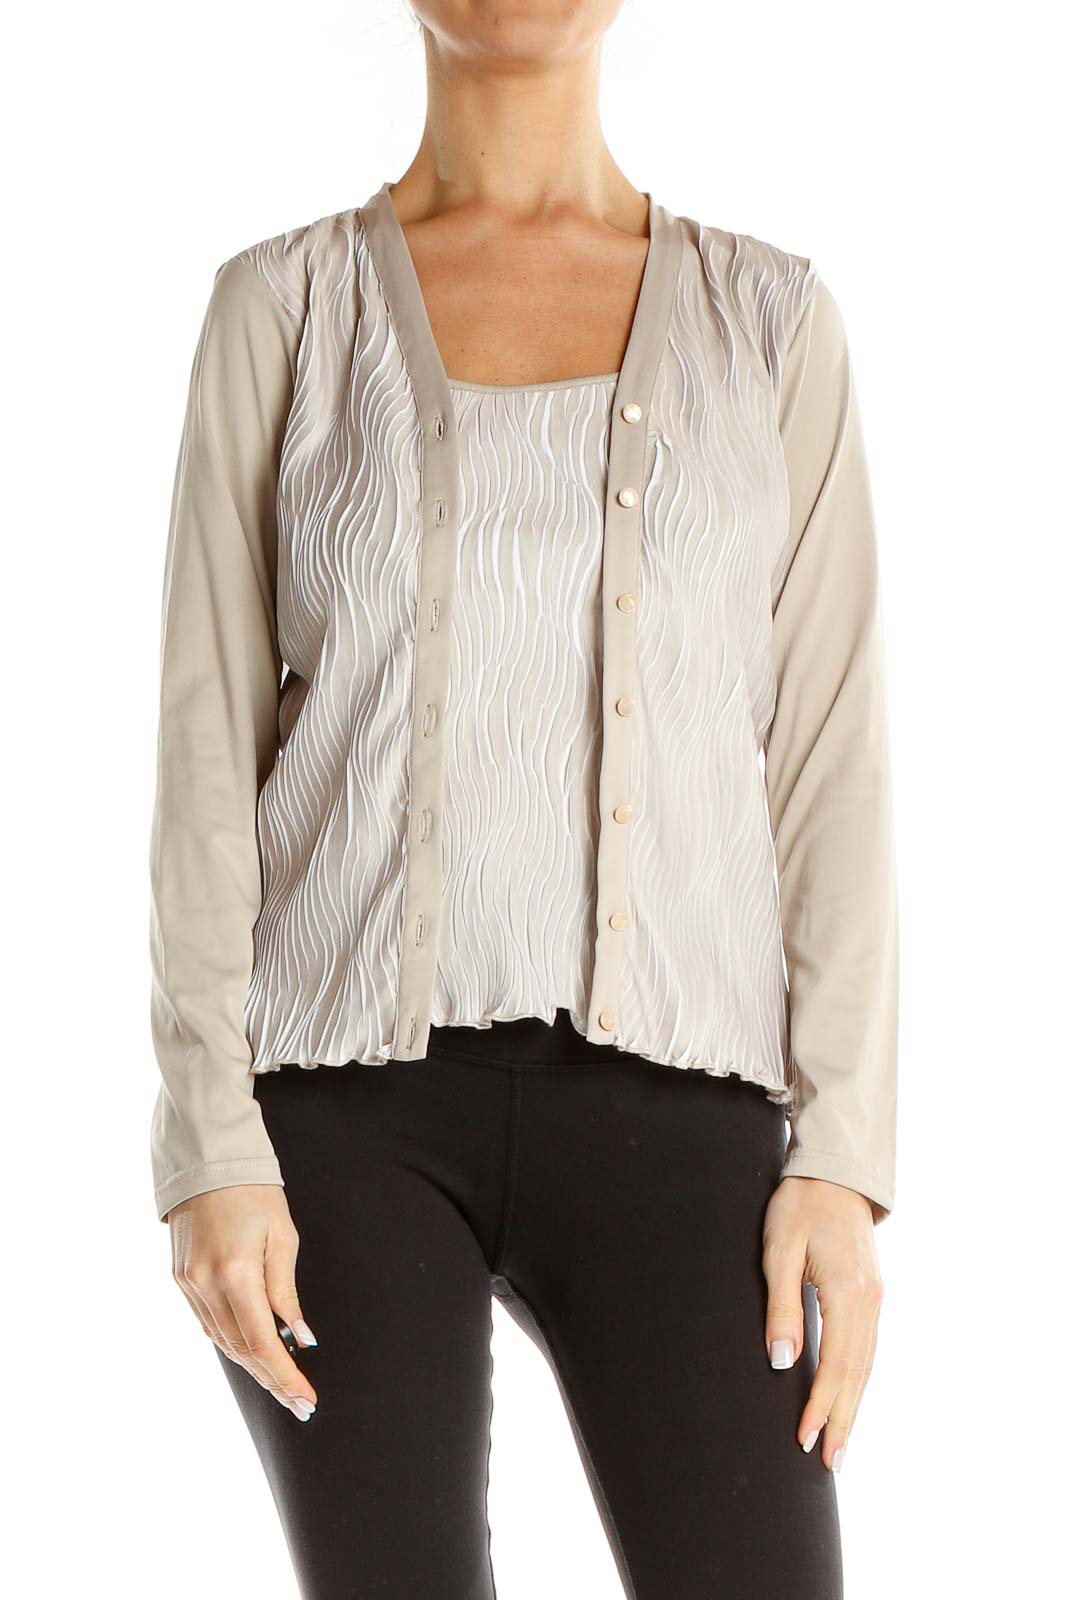 Beige Textured Attached Top and Cardigan Front